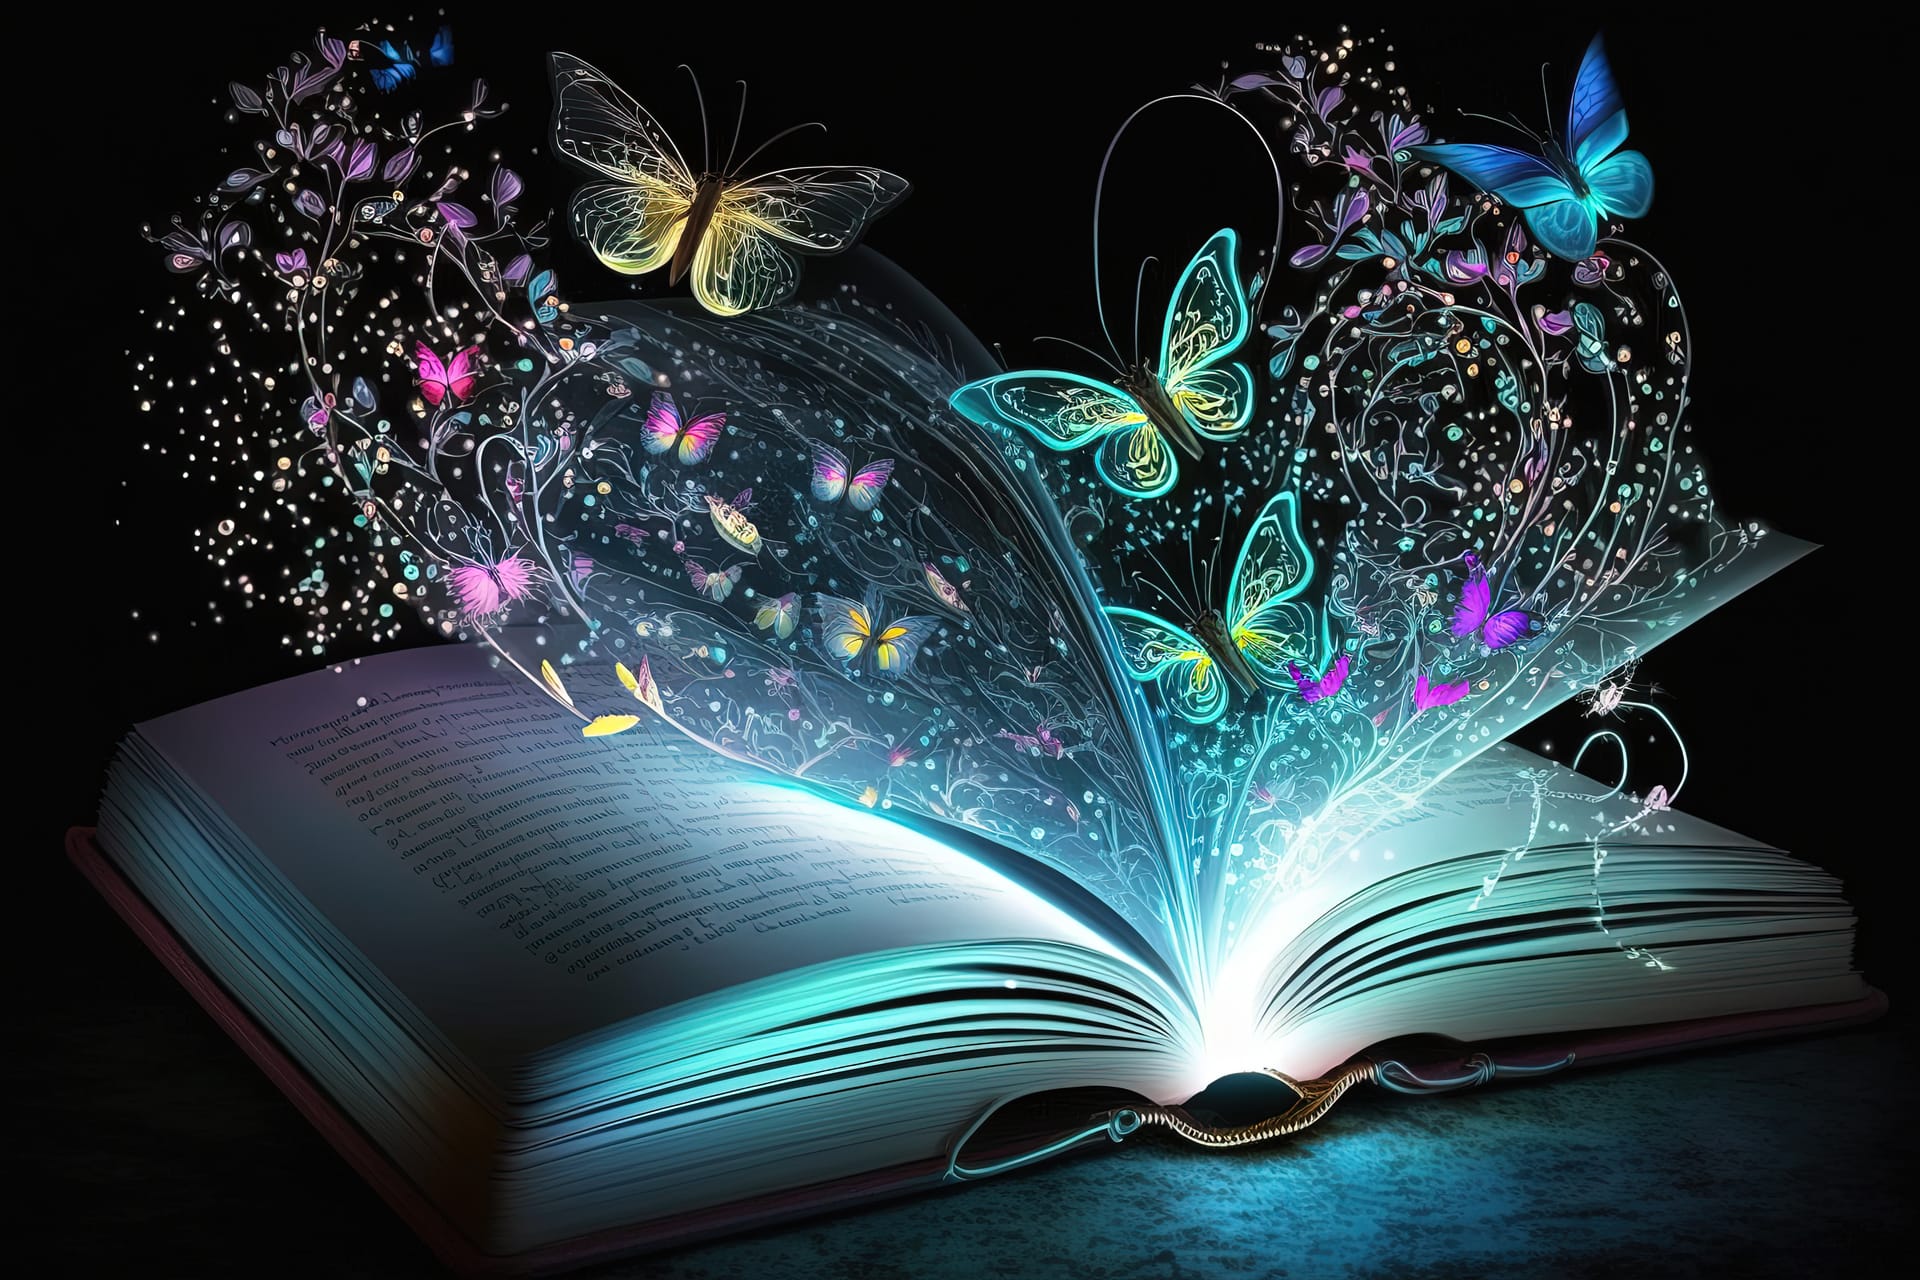 Open magic book with glowing flora butterflies butterfly image